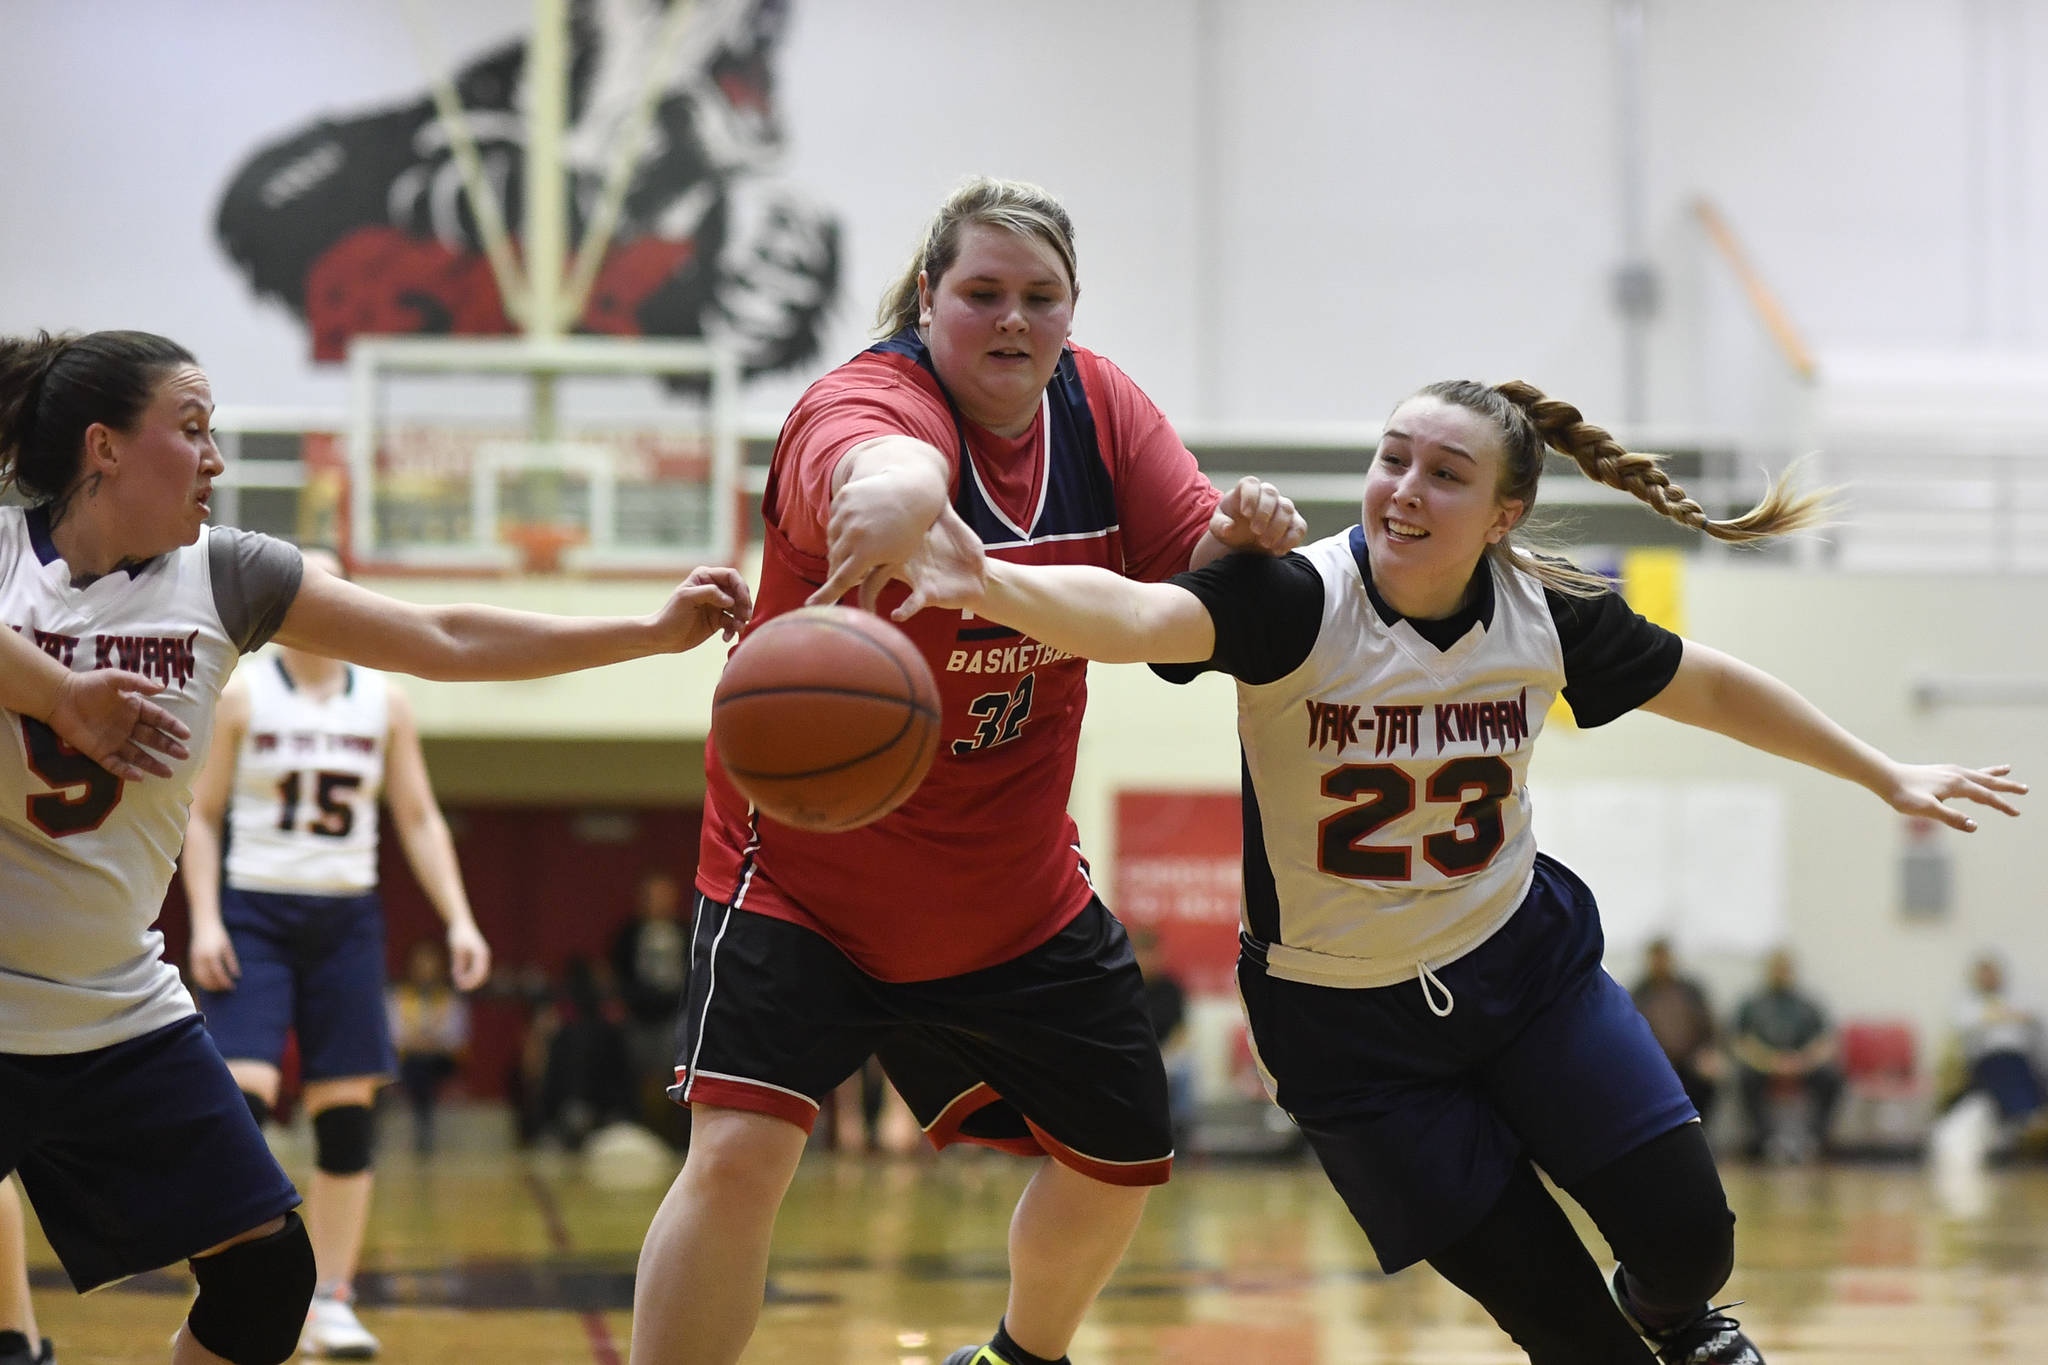 Kake’s Paulette Aceveda, center, reaches for a loose ball against Yakutat’s Janie Jensen, right, and Kim Buller, left, at the Juneau Lions Club 73rd Annual Gold Medal Basketball Tournament at Juneau-Douglas High School: Yadaa.at Kalé on Tuesday, March 19, 2019. Yakutat won 64-48. (Michael Penn | Juneau Empire)